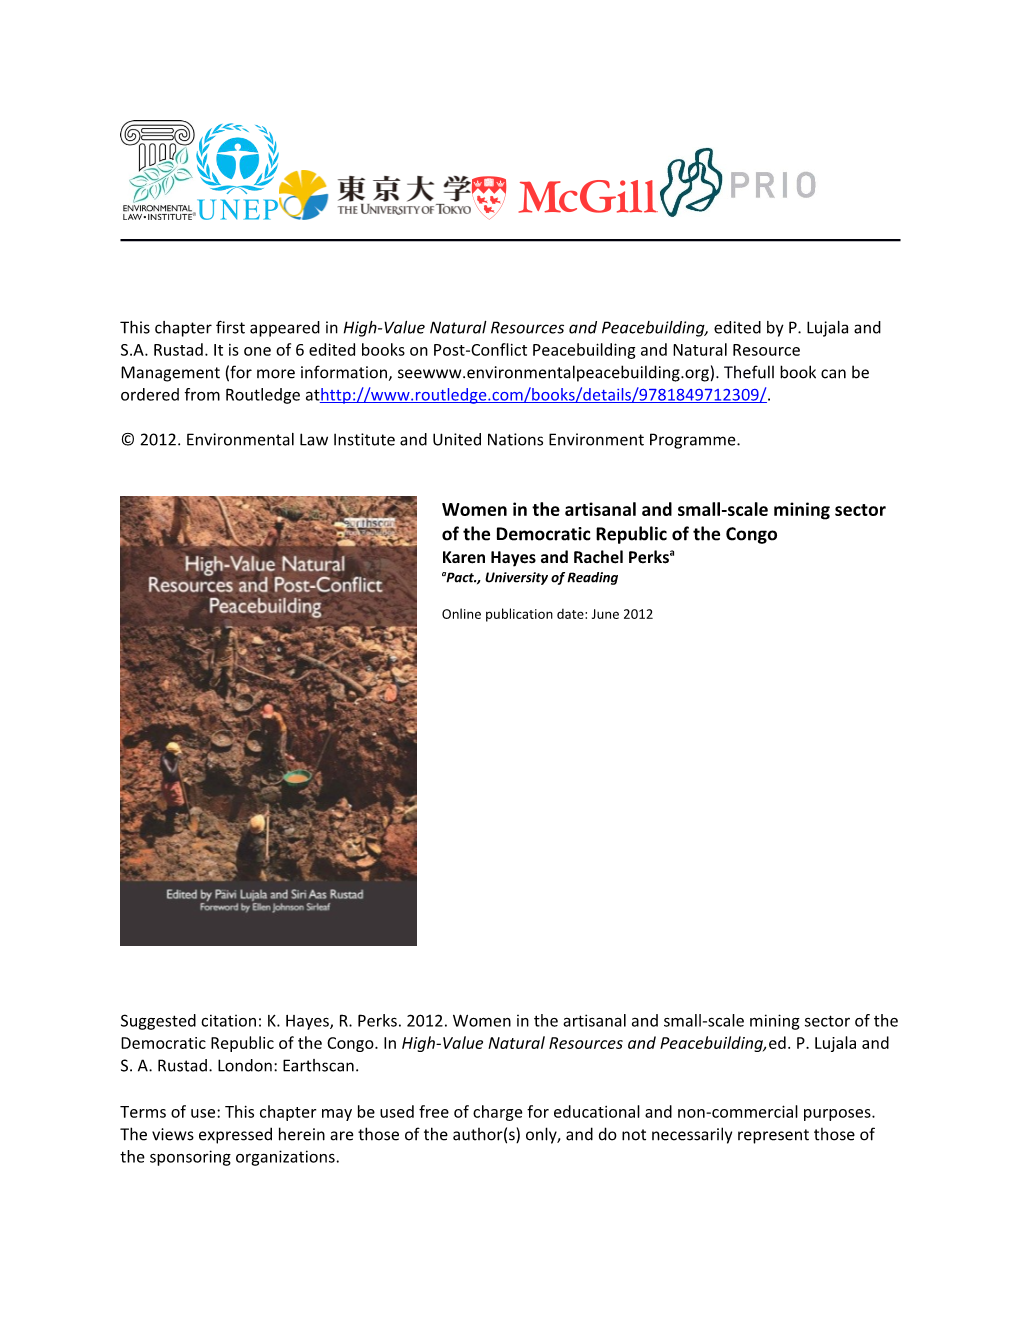 Women in the Artisanal and Small-Scale Mining Sector of the Democratic Republic of the Congo Karen Hayes and Rachel Perksa Apact., University of Reading